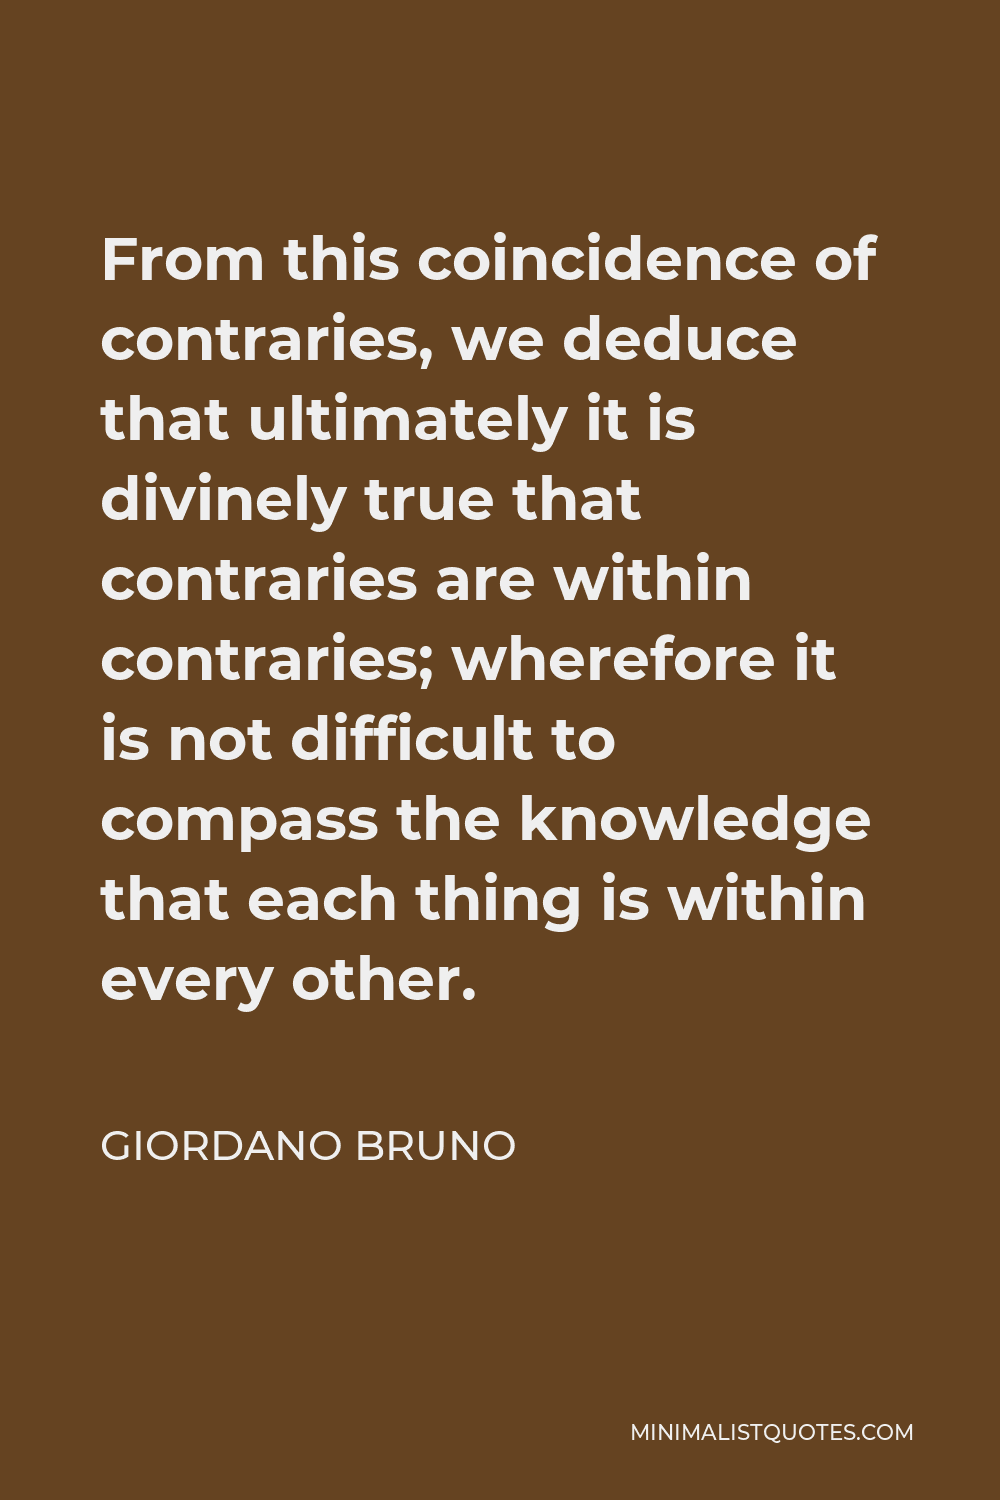 Giordano Bruno Quote - From this coincidence of contraries, we deduce that ultimately it is divinely true that contraries are within contraries; wherefore it is not difficult to compass the knowledge that each thing is within every other.